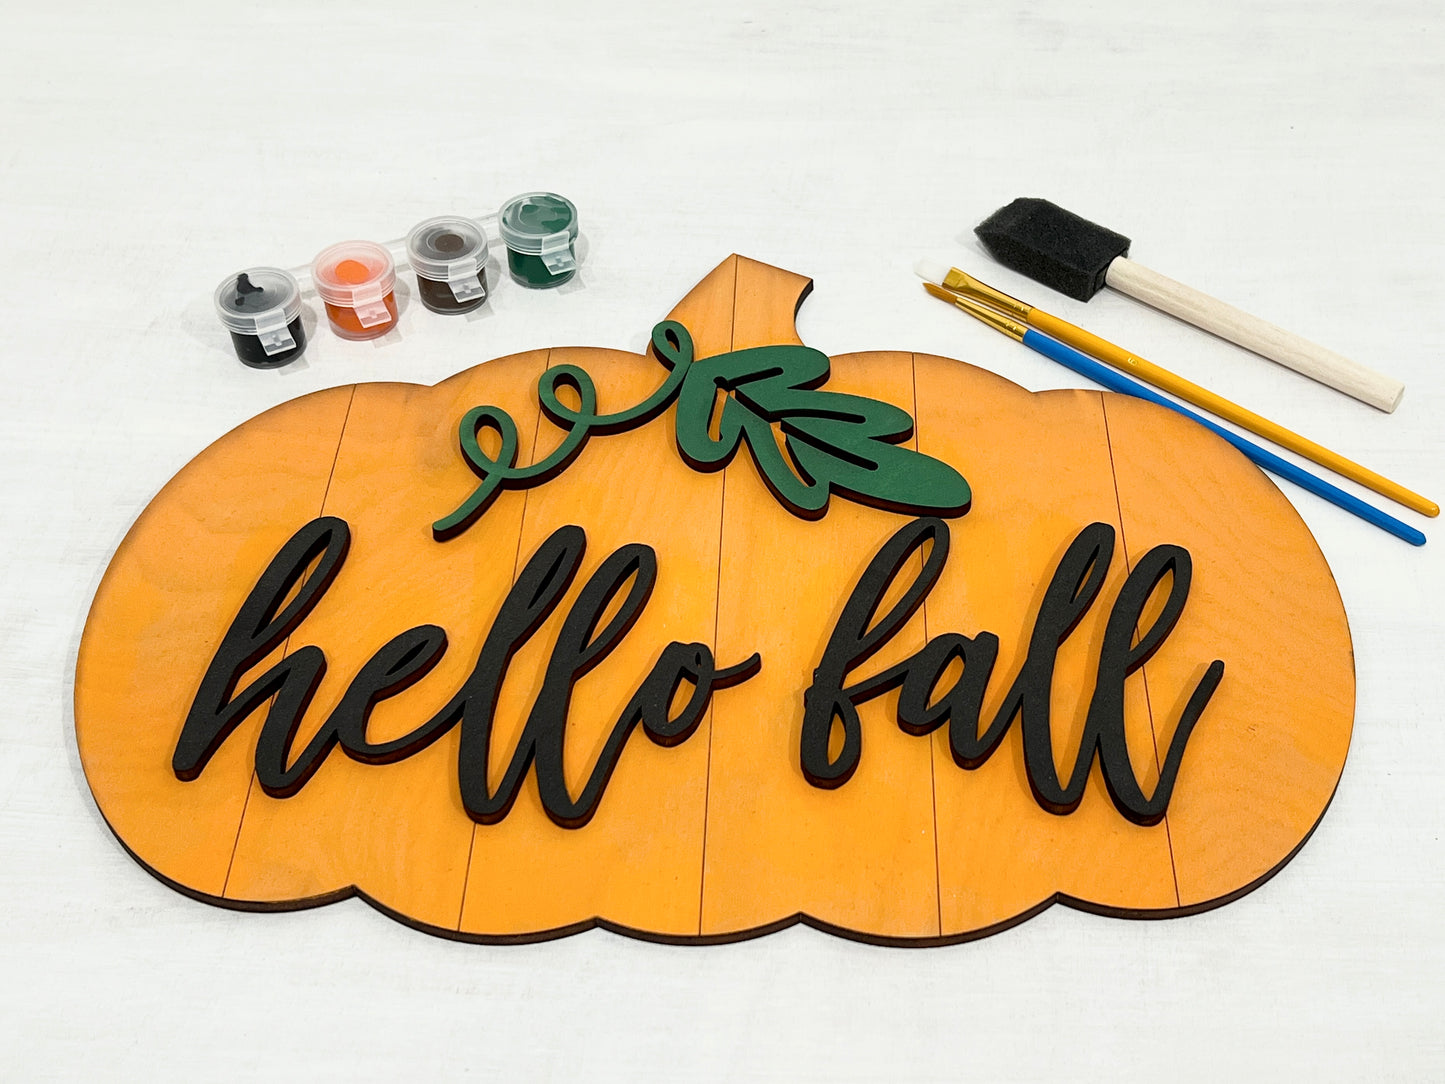 hello fall sign making kit - DIY fall decor - paint party kits - Celebrating Together